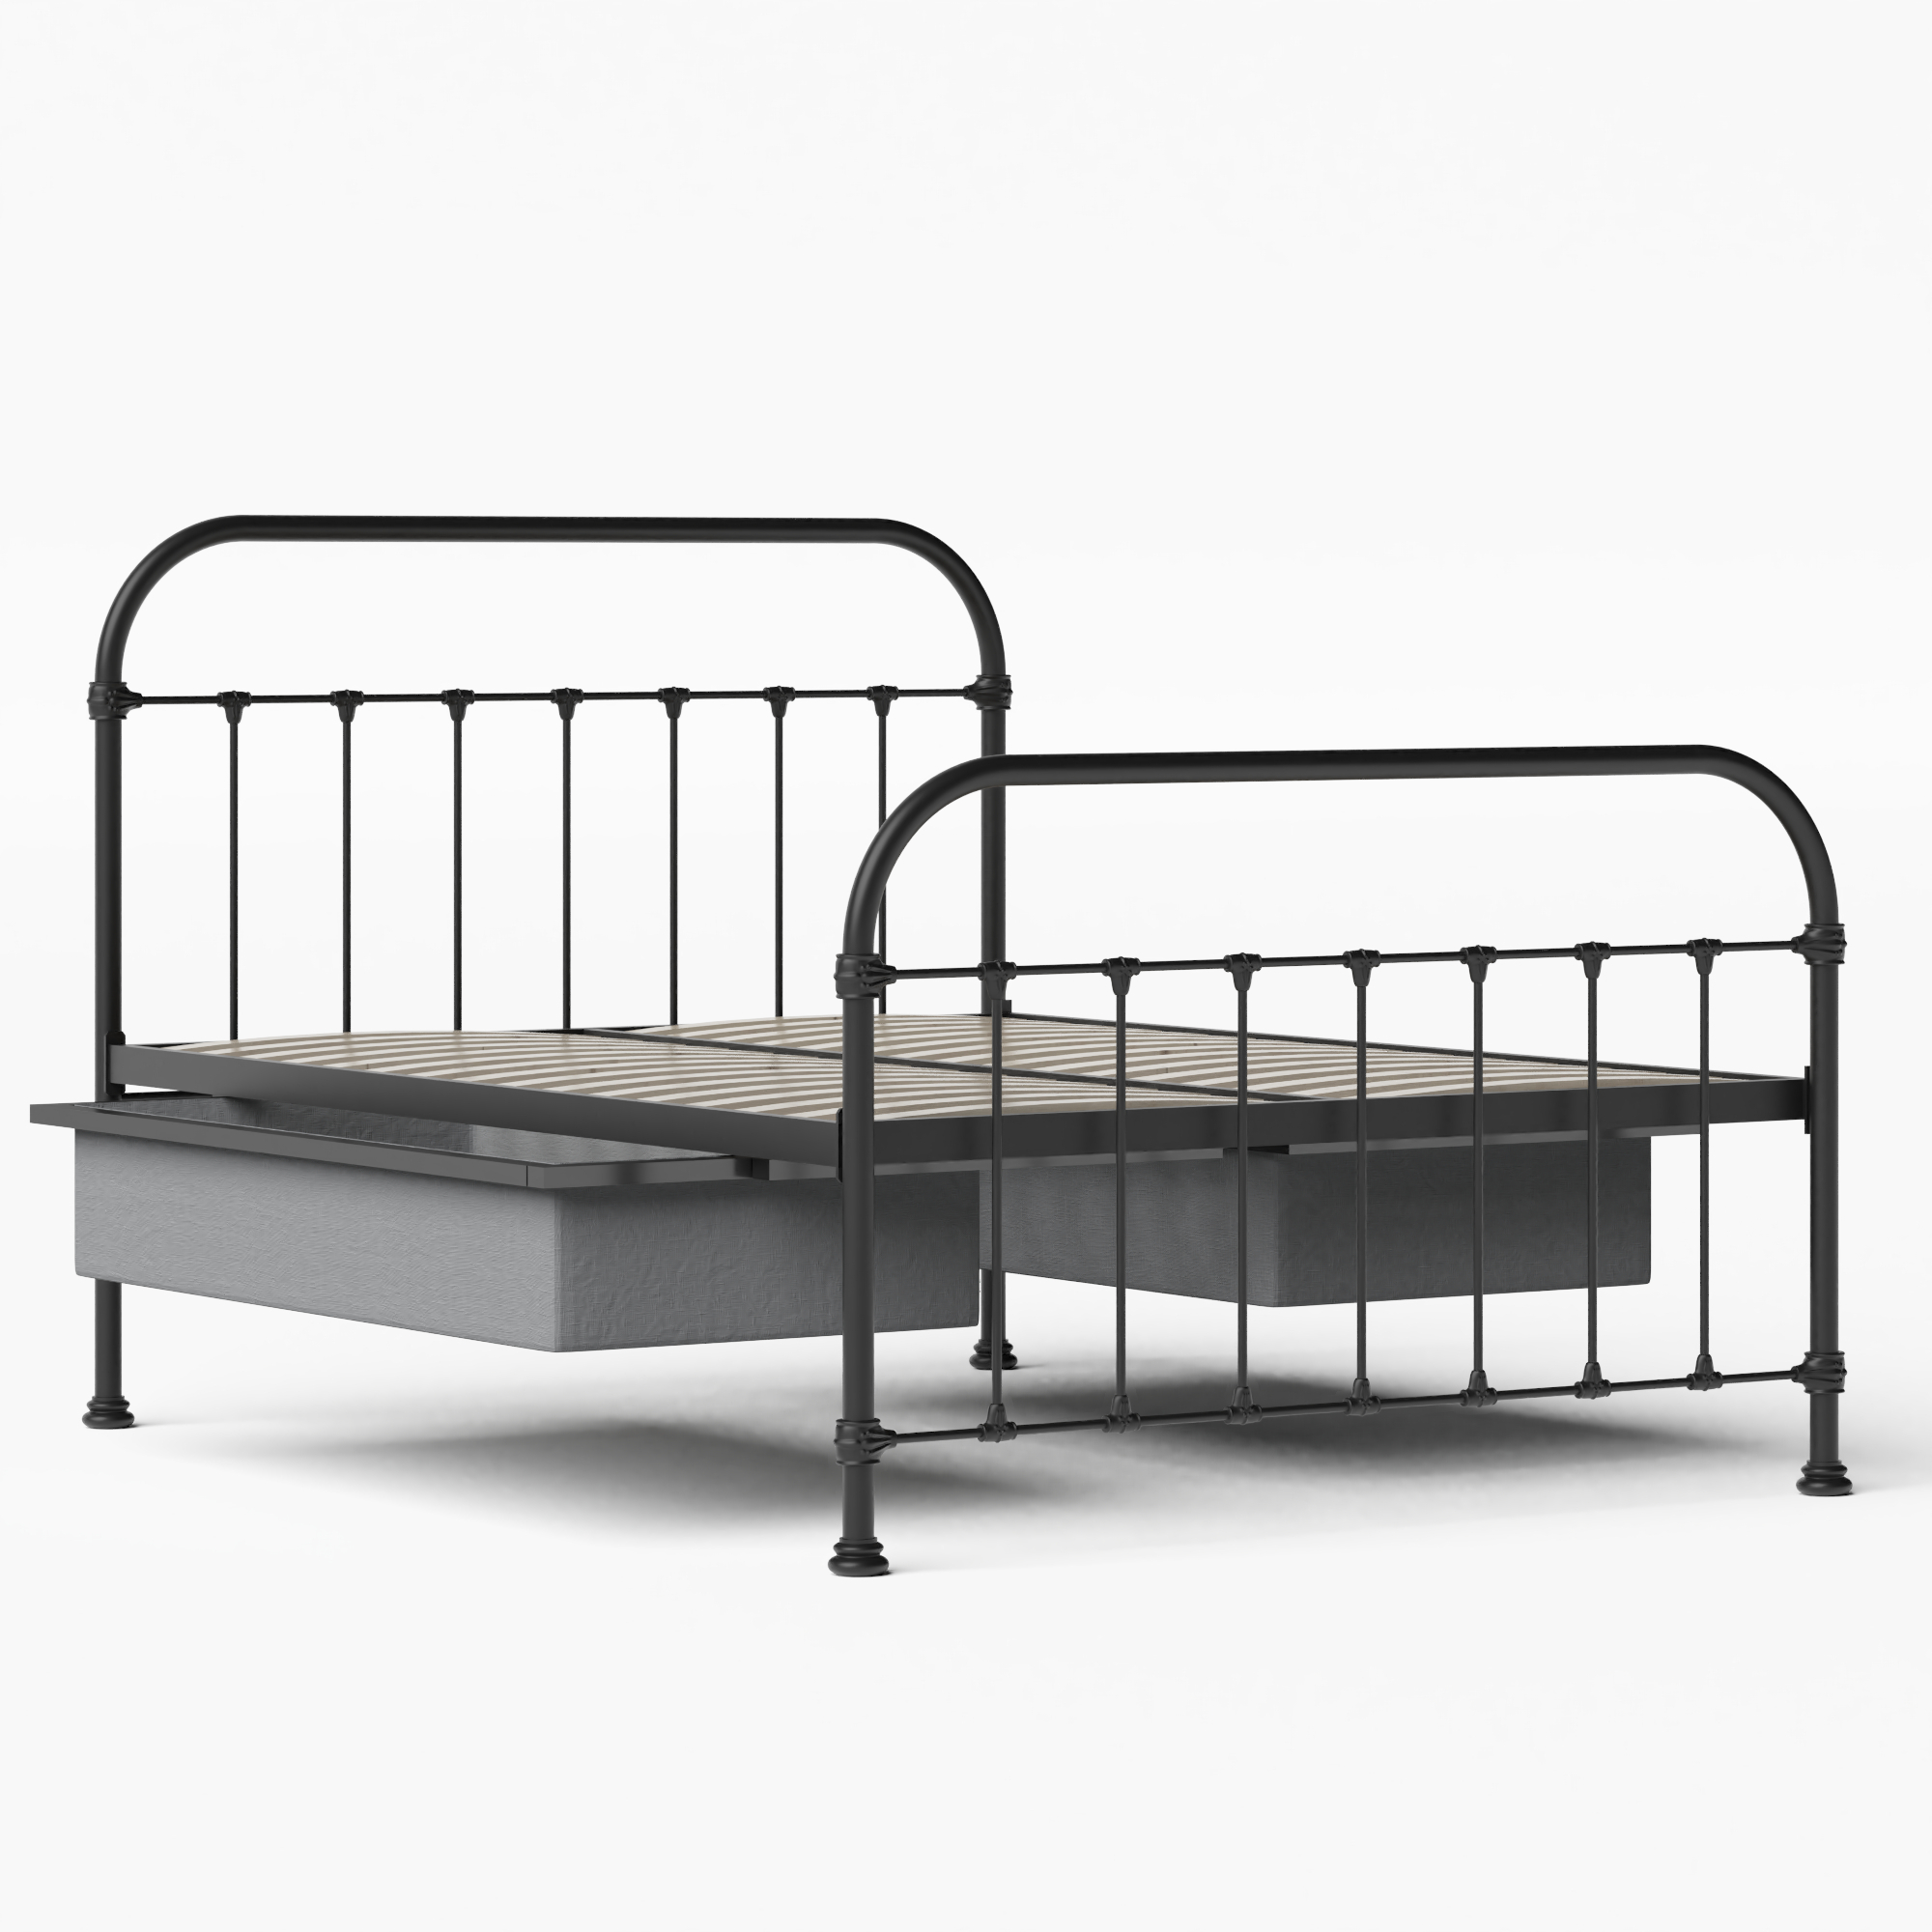 Timolin iron/metal bed in black with drawers